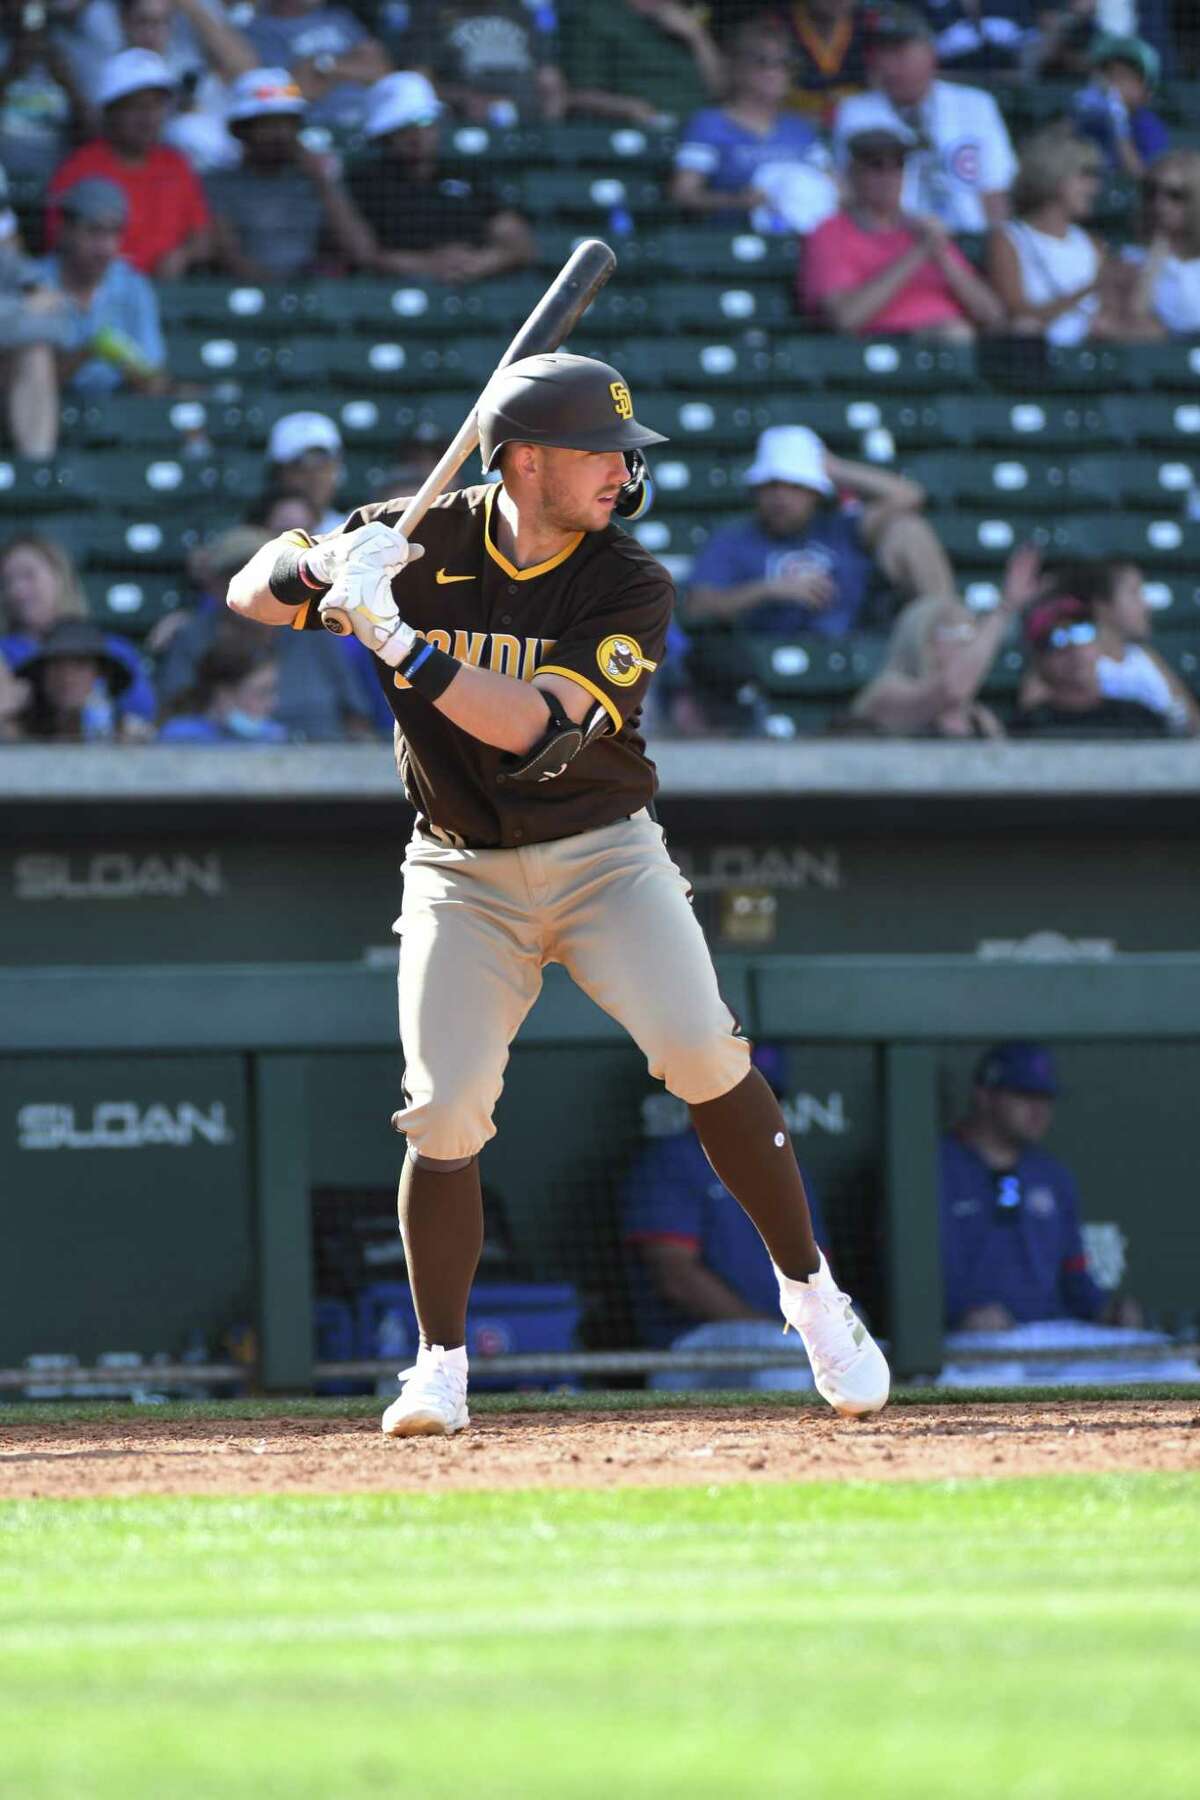 The San Diego Padres has selected the contract of minor leaguer Matt Batten, a Shelton native and former Qunnipiac star.